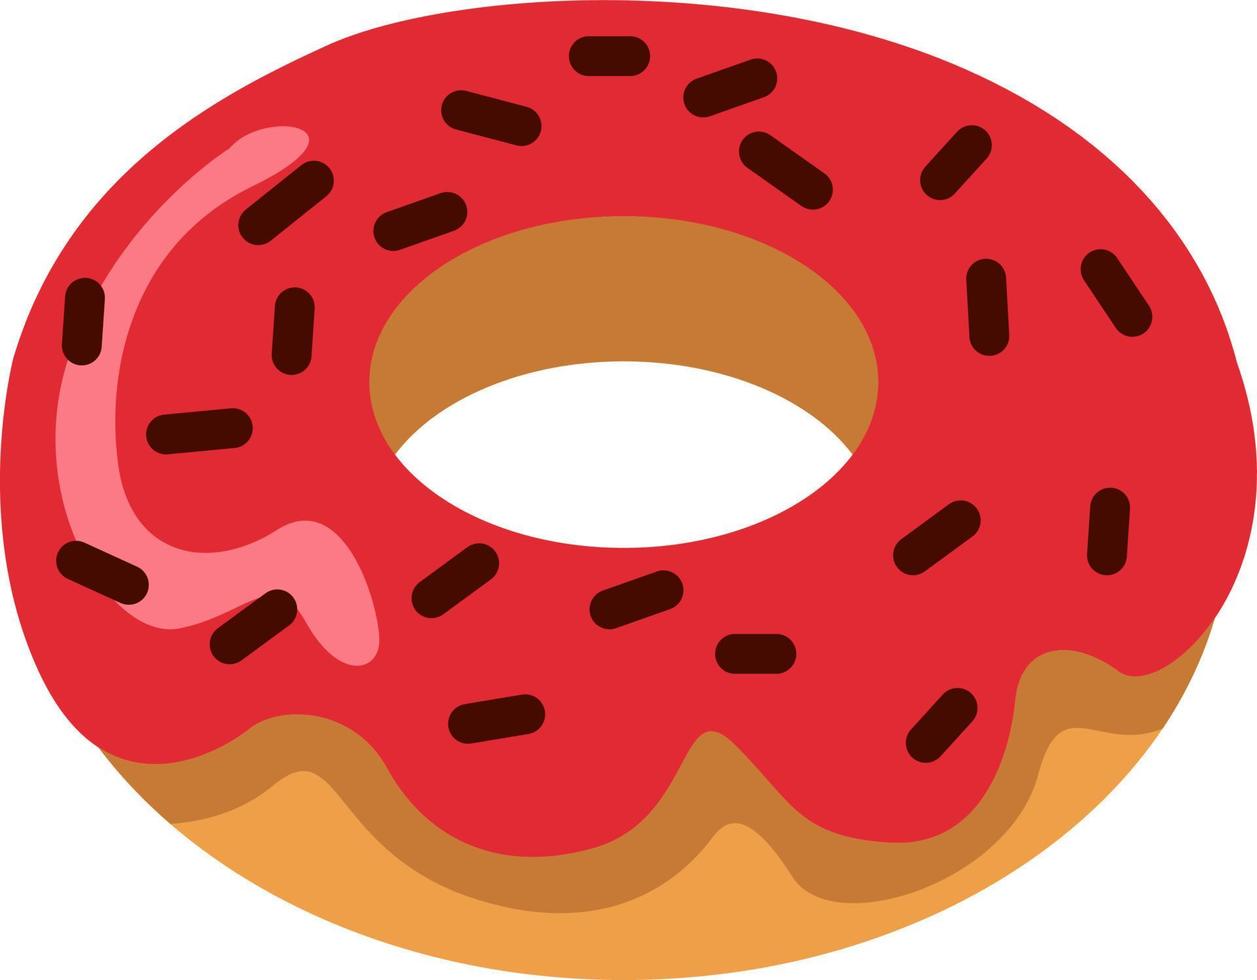 Donut with strawberry glaze, illustration, vector on a white background